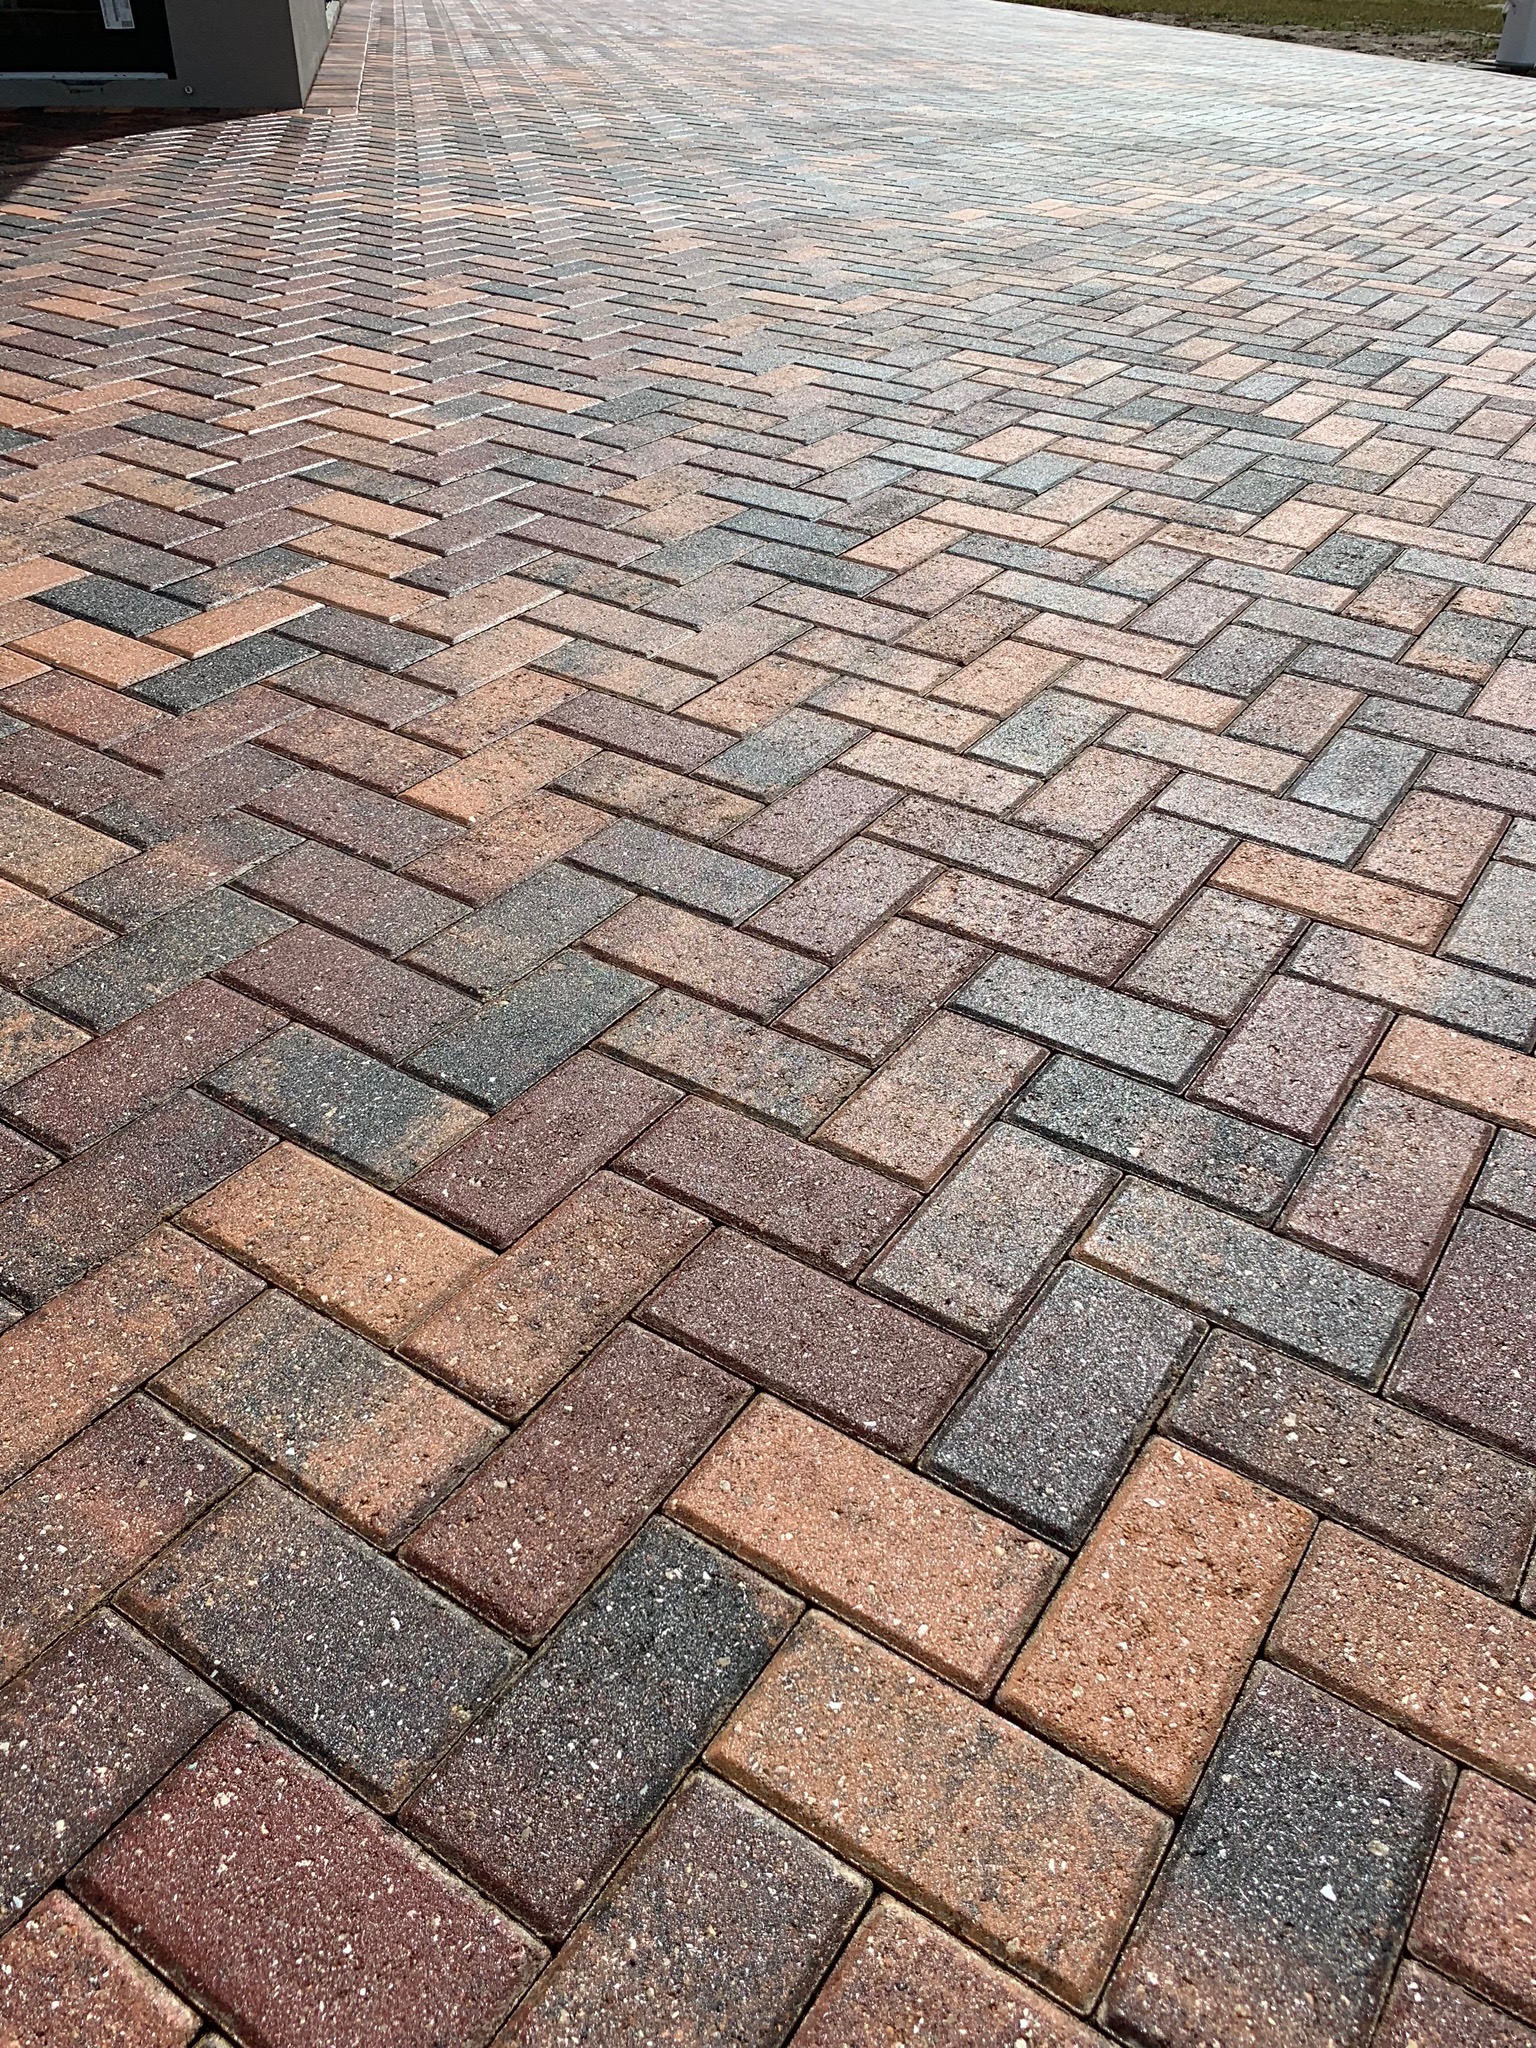 How much to Clean and Seal Pavers